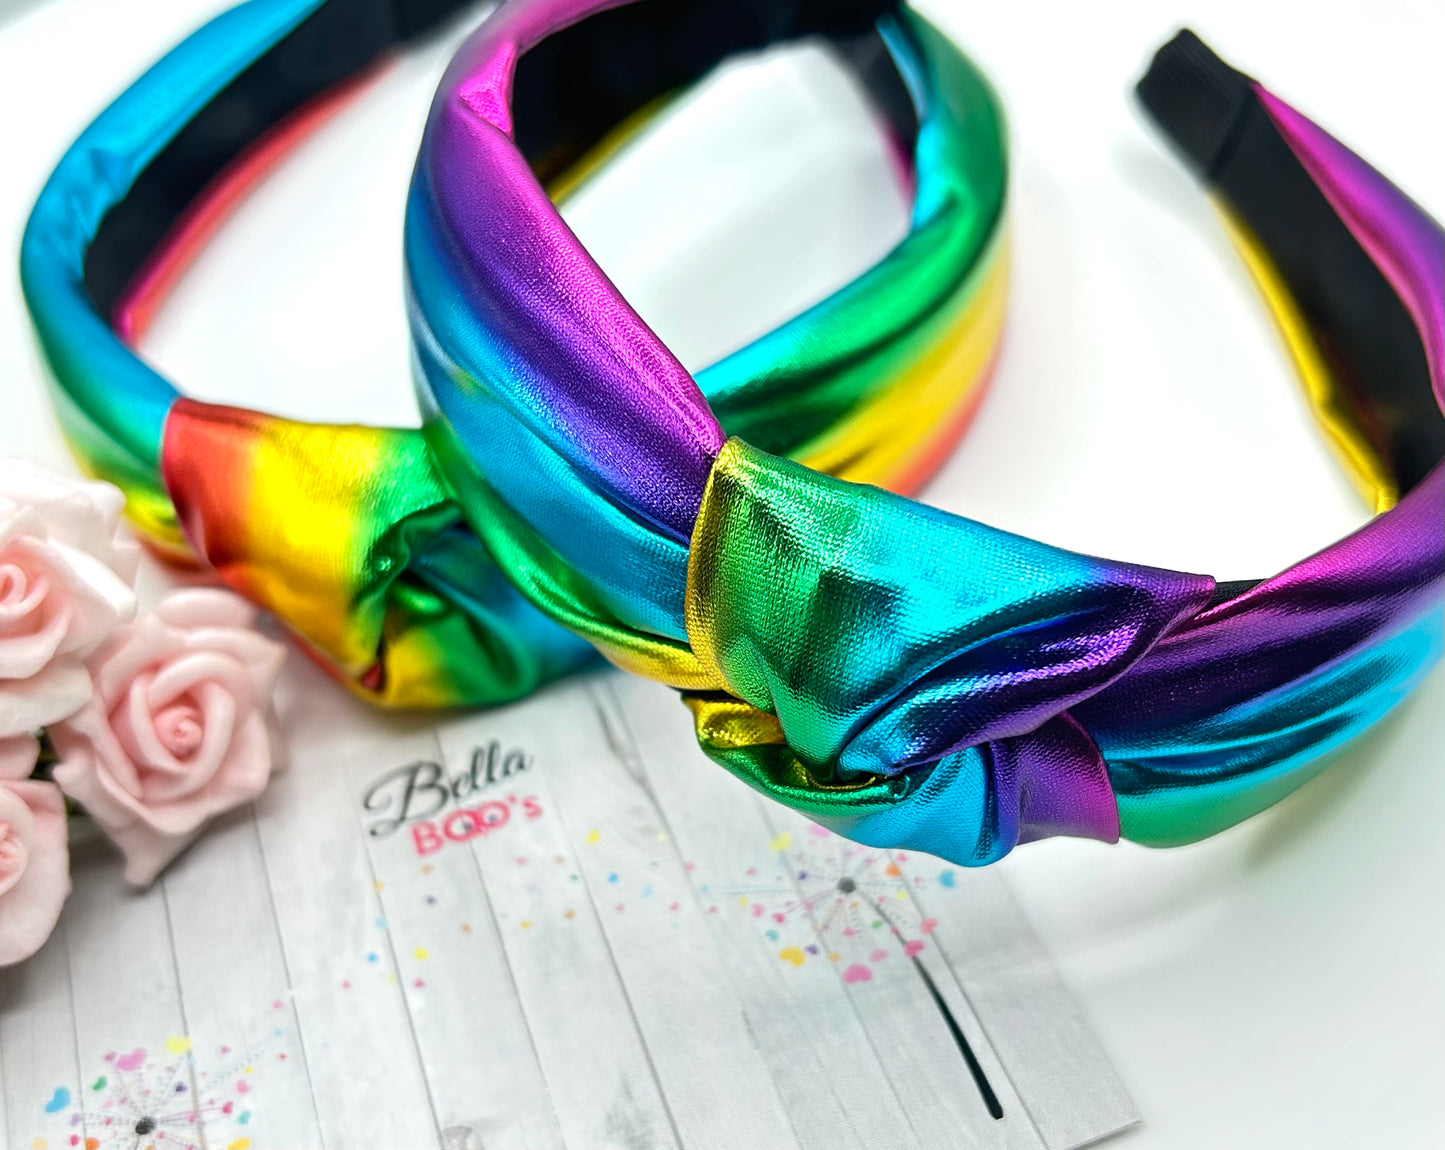 Load image into Gallery viewer, Metallic Rainbow Hair Band
